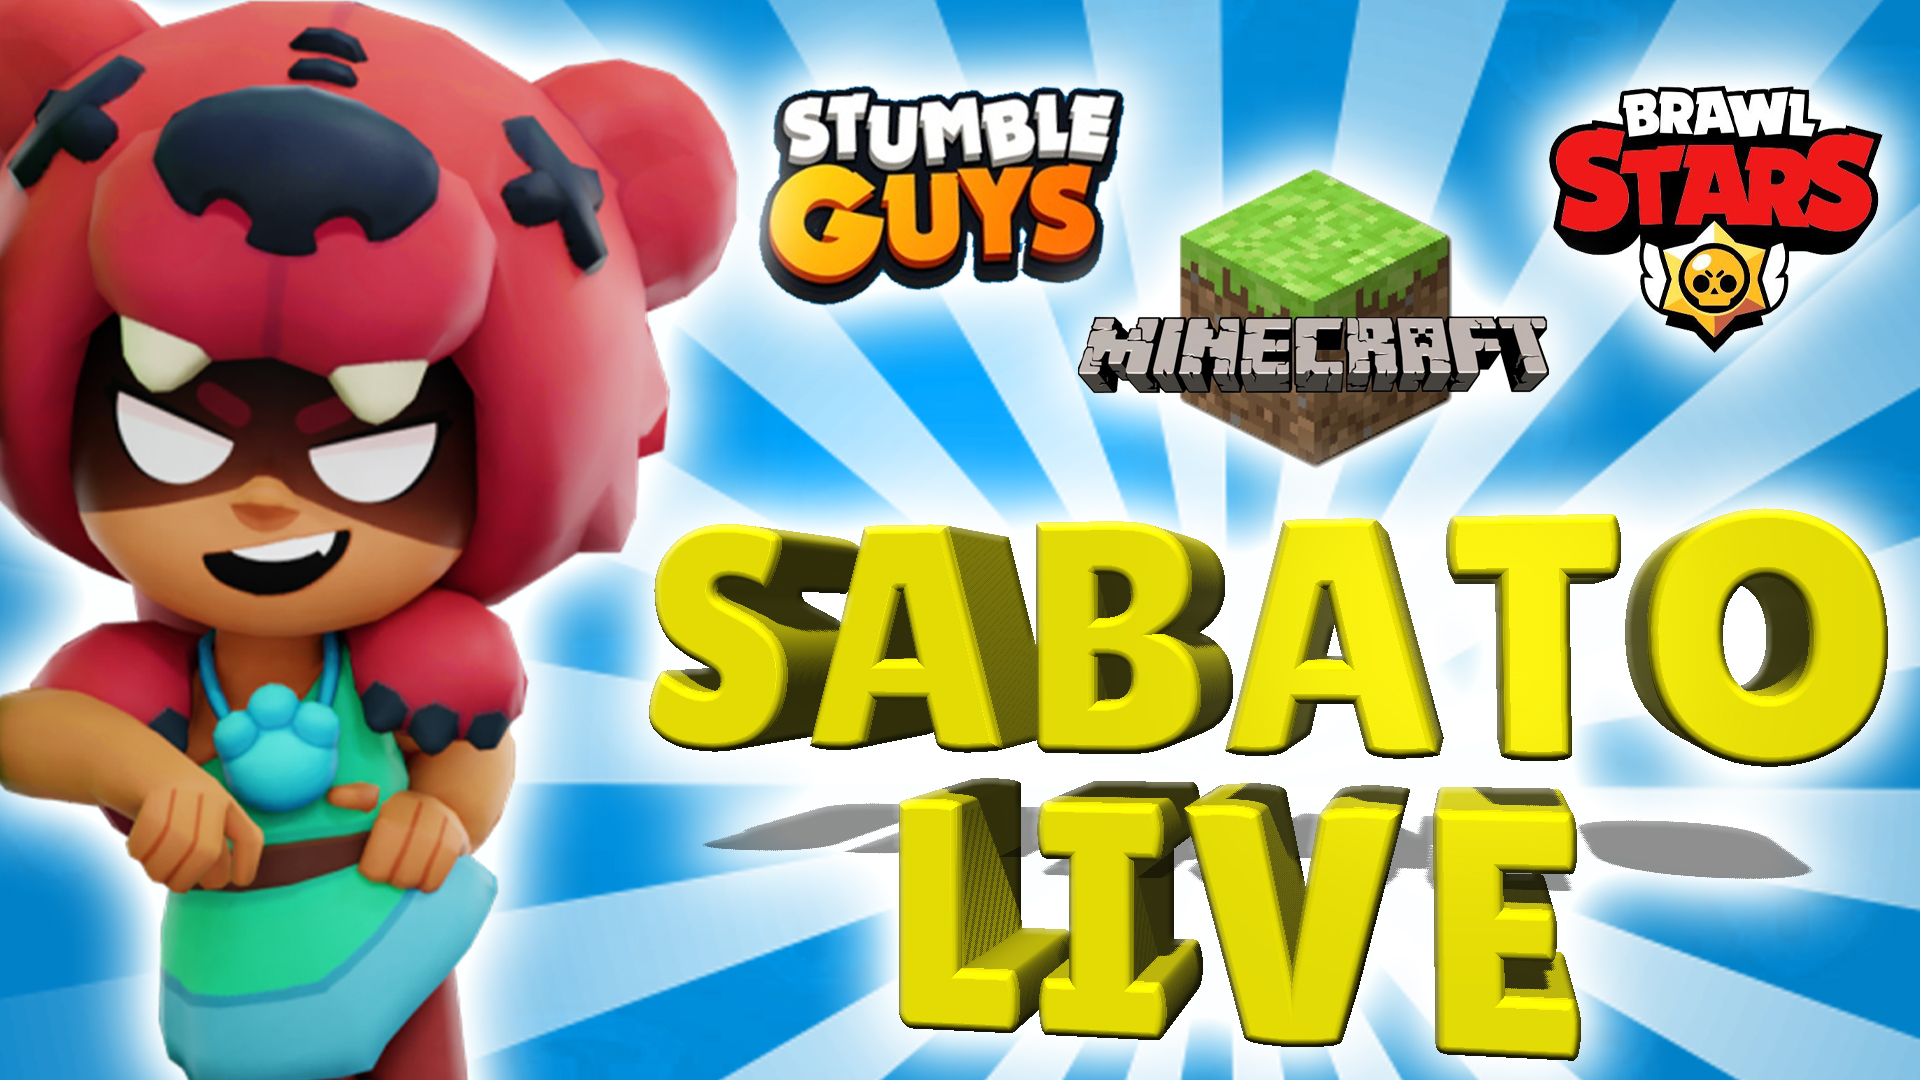 Today Super Live On Youtube To Have Fun With Brawl Stars Stumble Guys And Minecraft - serveur minecraft brawl stars